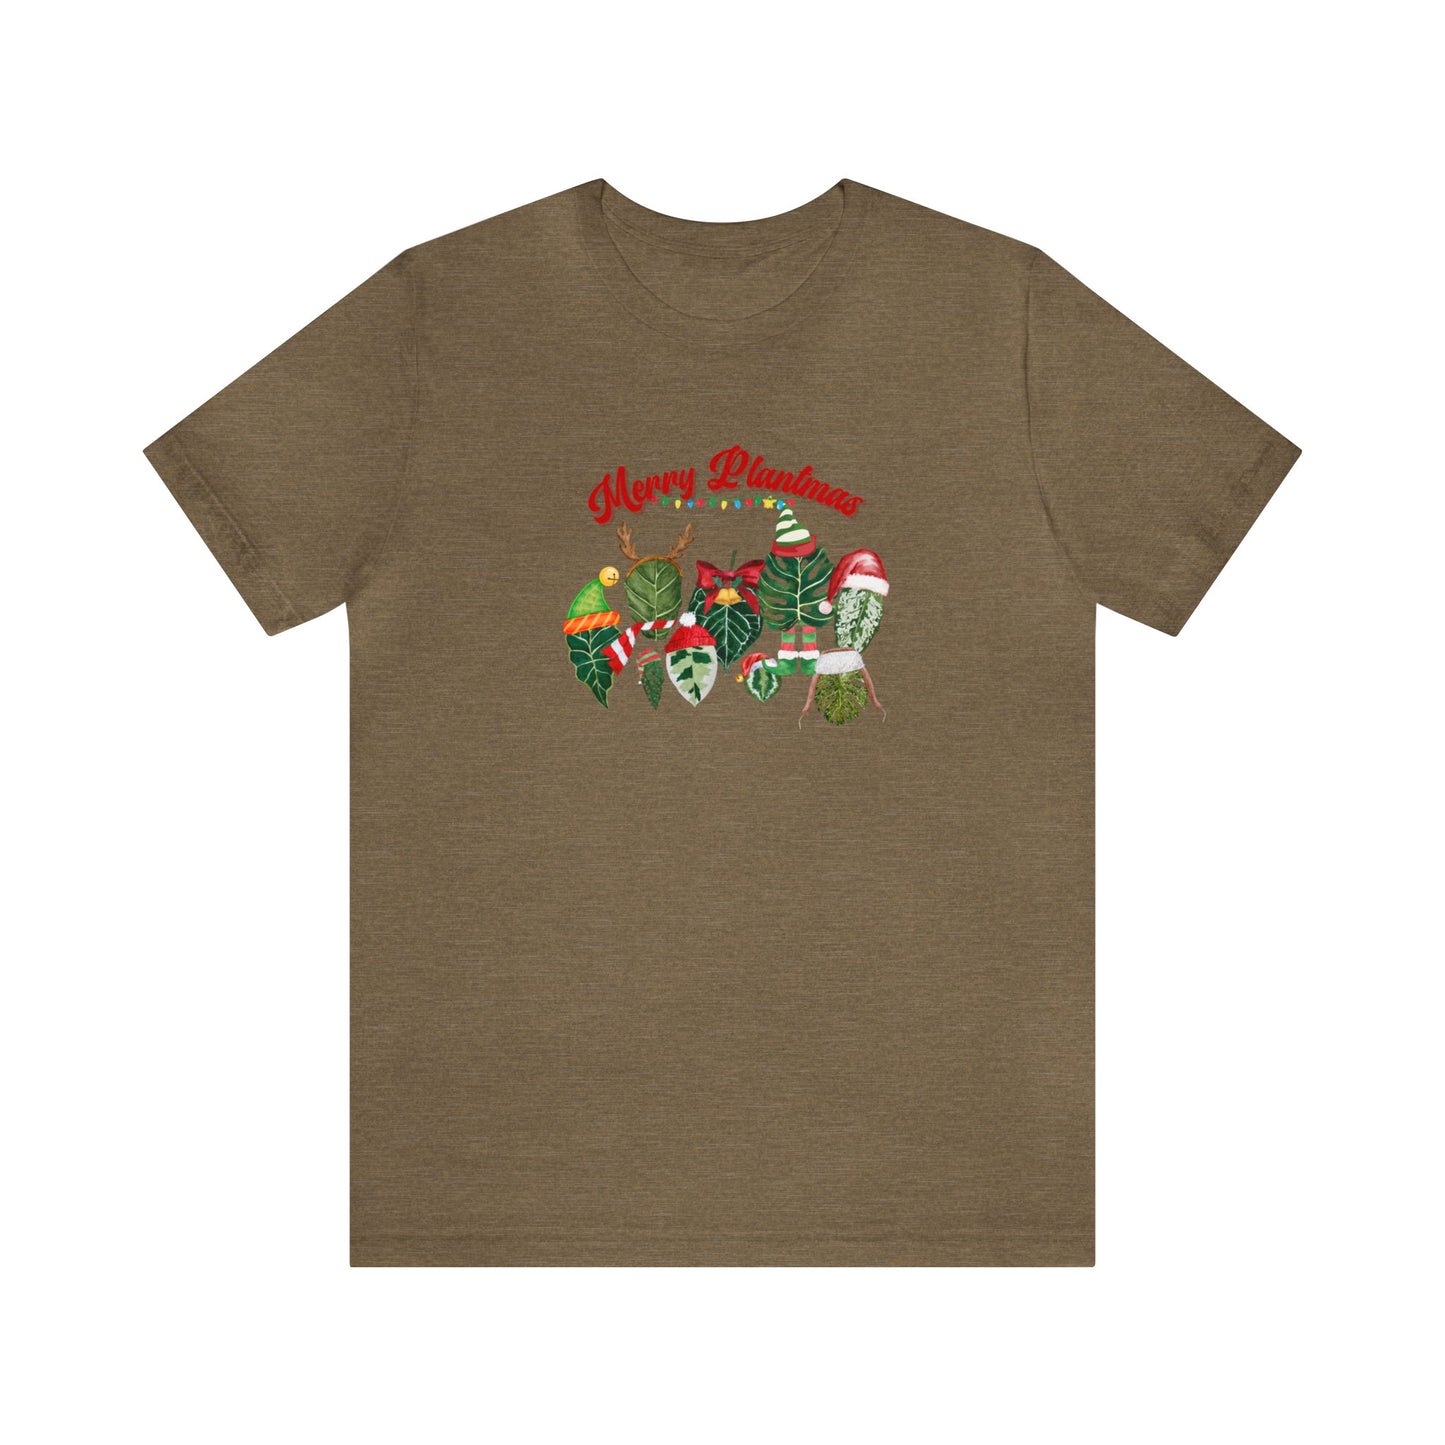 Ugly Christmas Sweater for plant lady or plant daddy. Merry Plantmas tshirt for plant lover and Christmas season. Funny plant tshirt